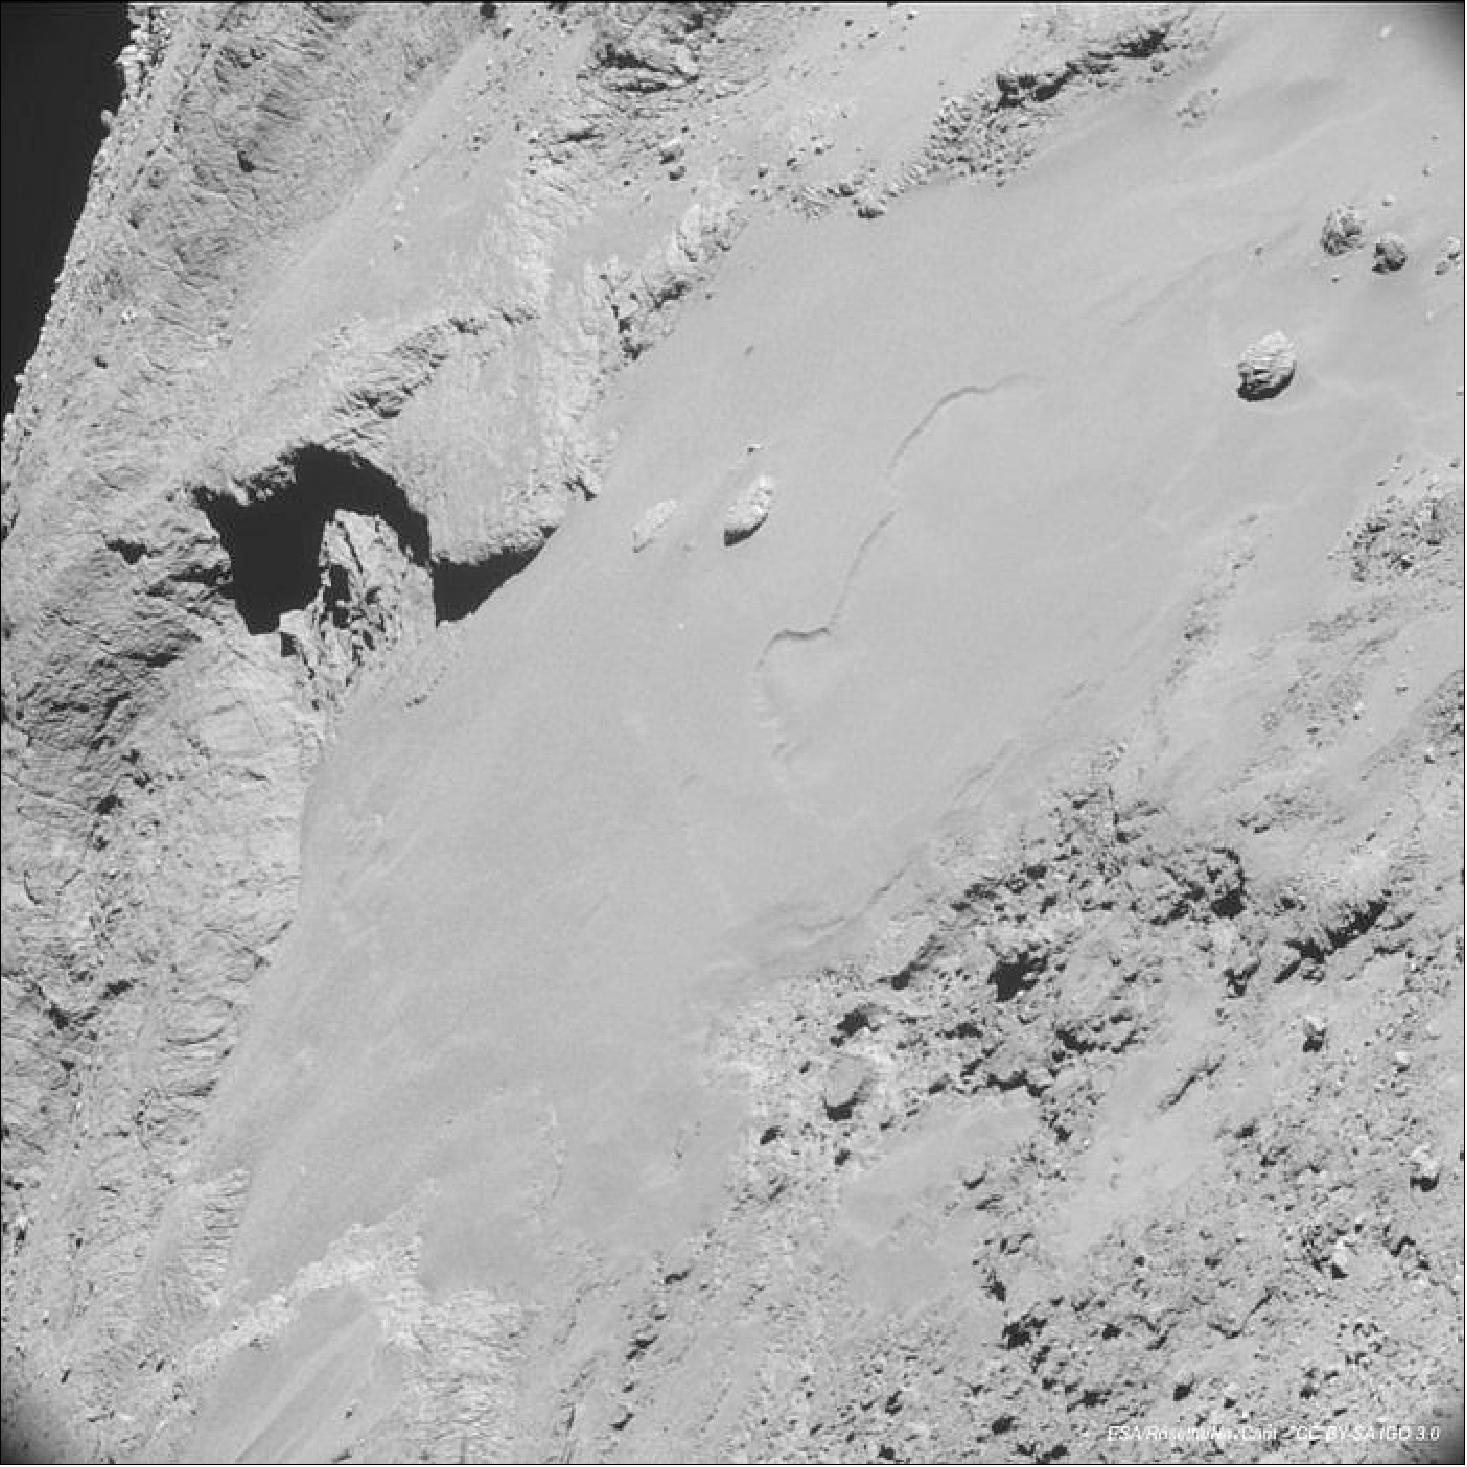 Figure 146: The surface of Comet 67P/C acquired on 14 February with NavCam from 8.7 km (image credit: ESA/Rosetta/NavCam, CC BY-SA IGO 3.0)